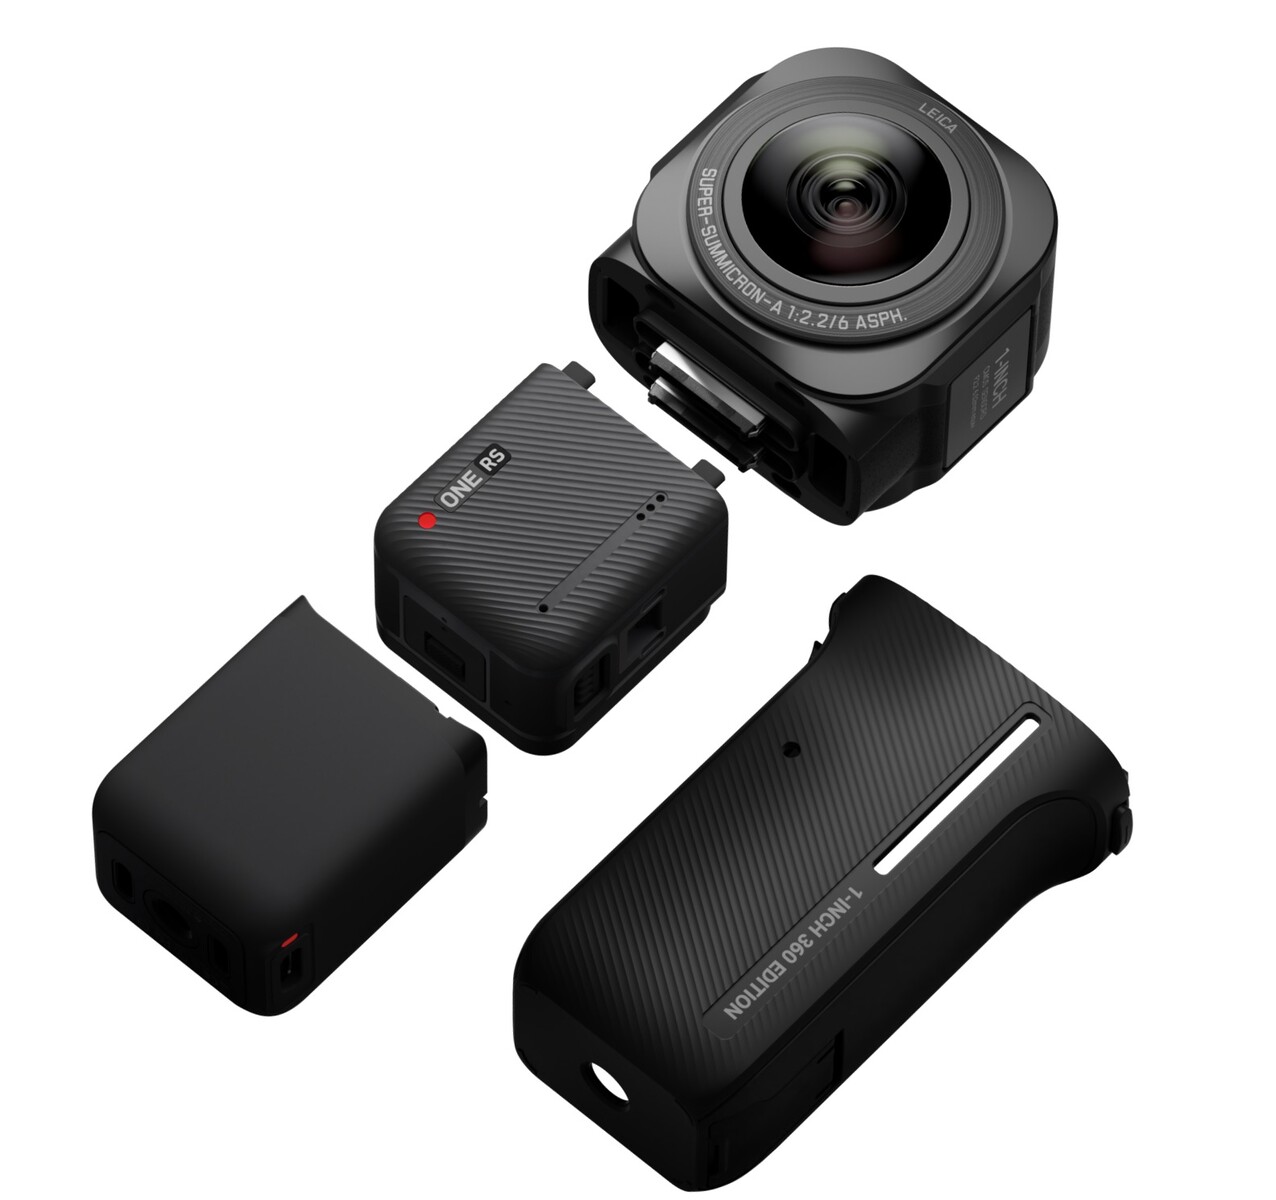 Insta360 One R Review - 360 Action Camera Hybrid Twin Edition 